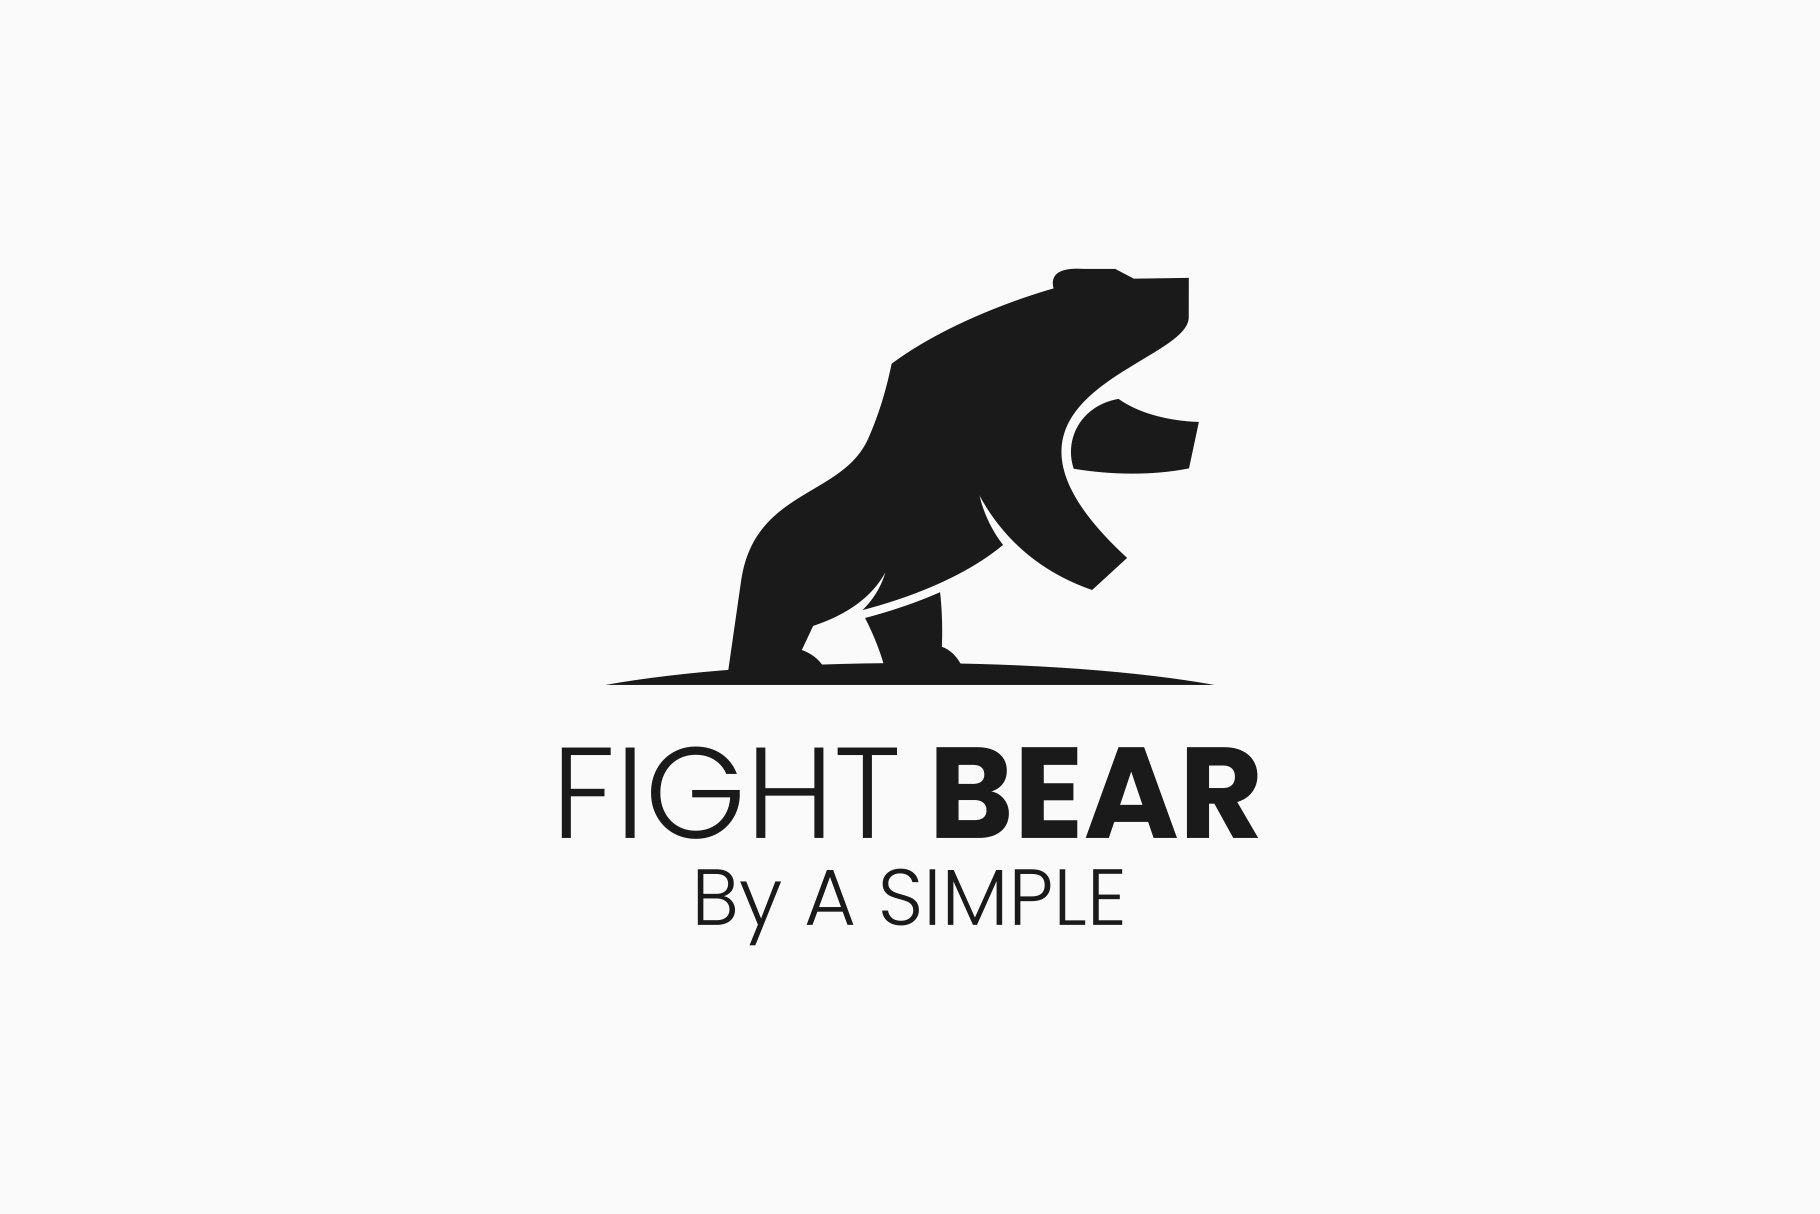 Fight Bear Silhouette Logo cover image.